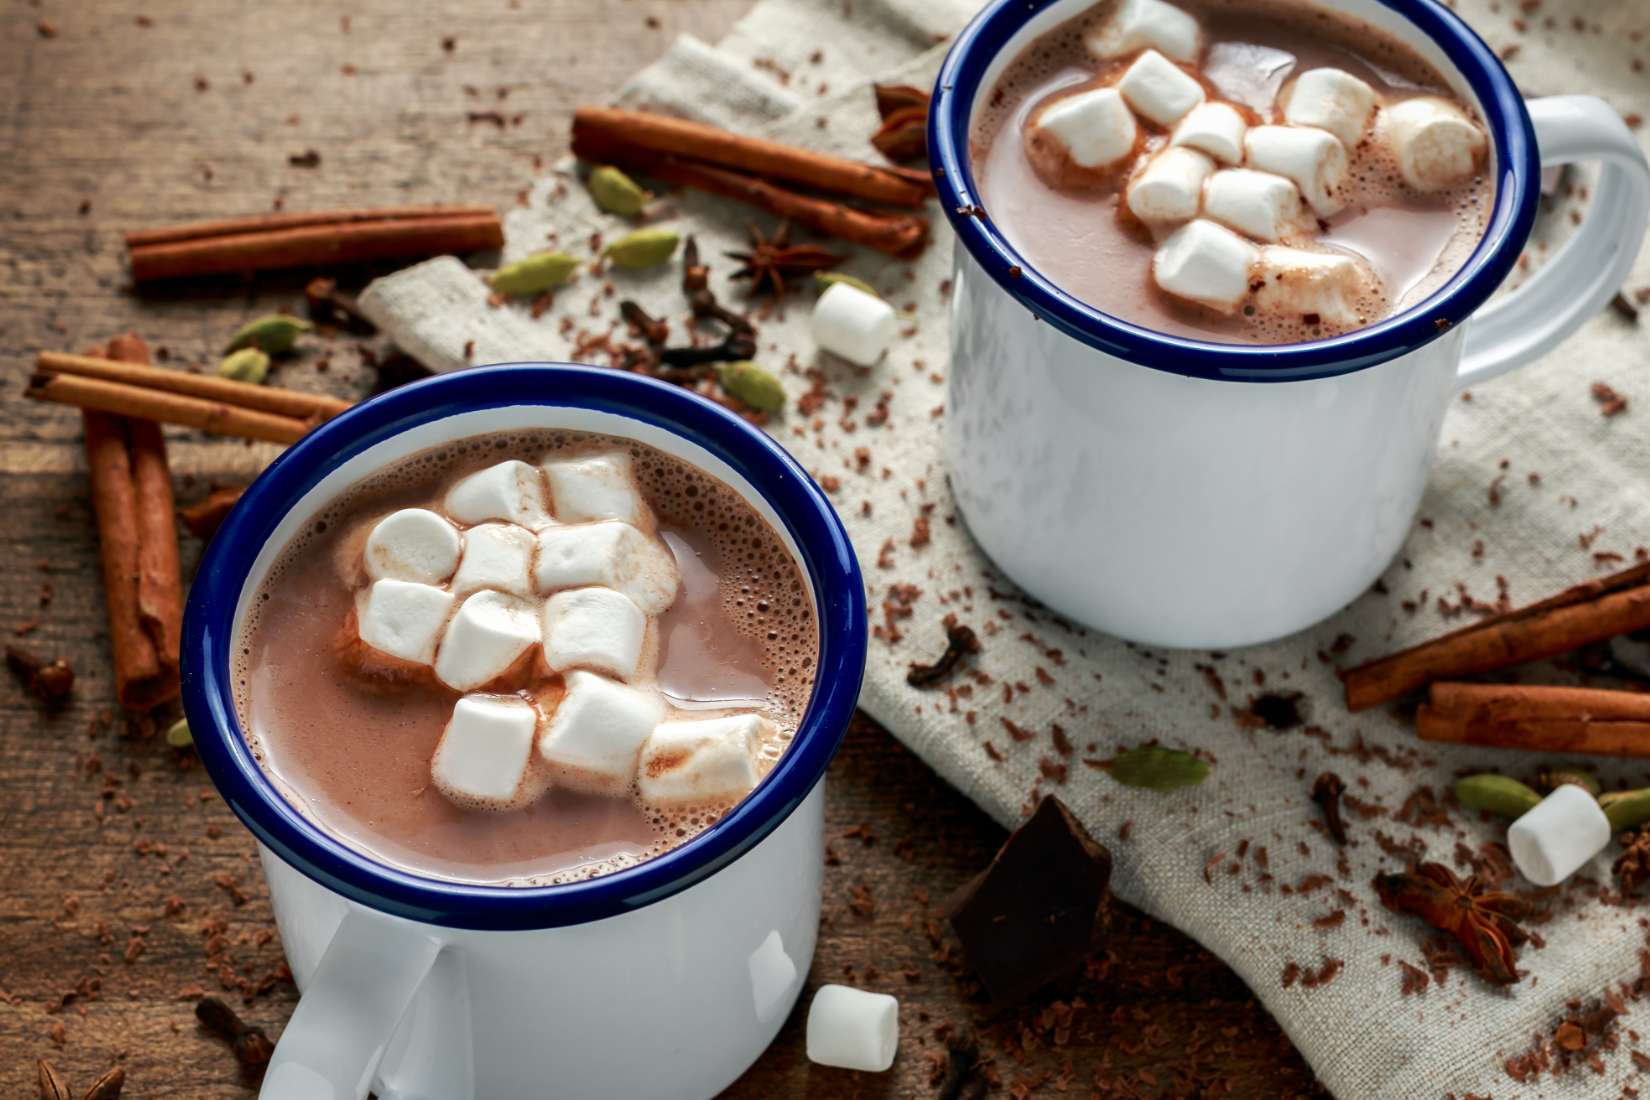 Two mugs of hot cocoa with marshmallows on a wooden background with cinnamon